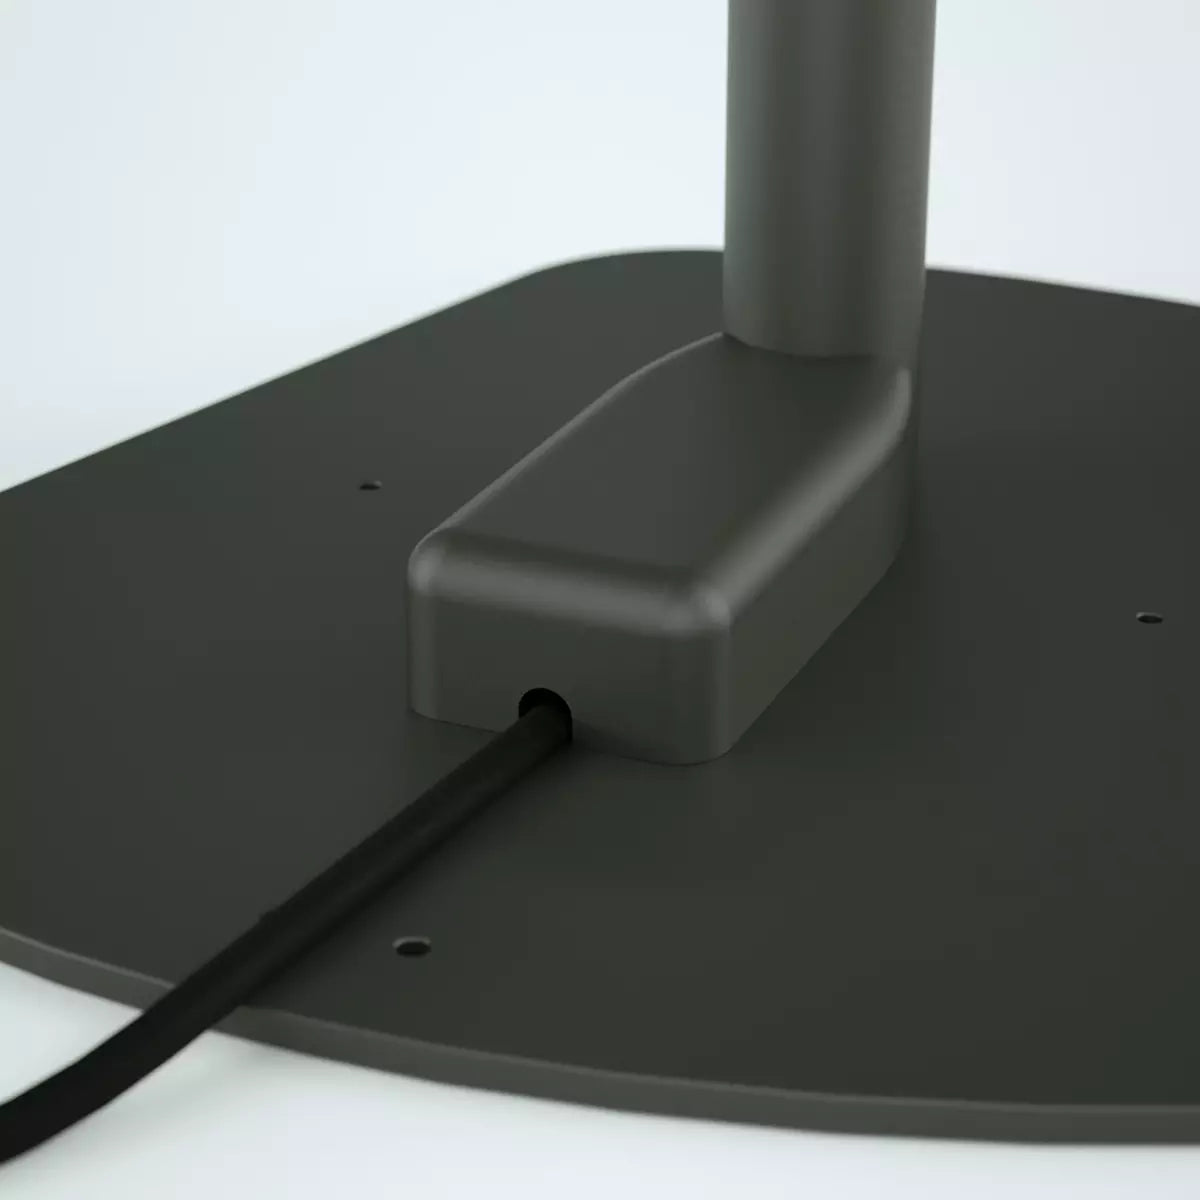 Close up of the black kiosk stand baseplate with the electrical cover hiding wiring..